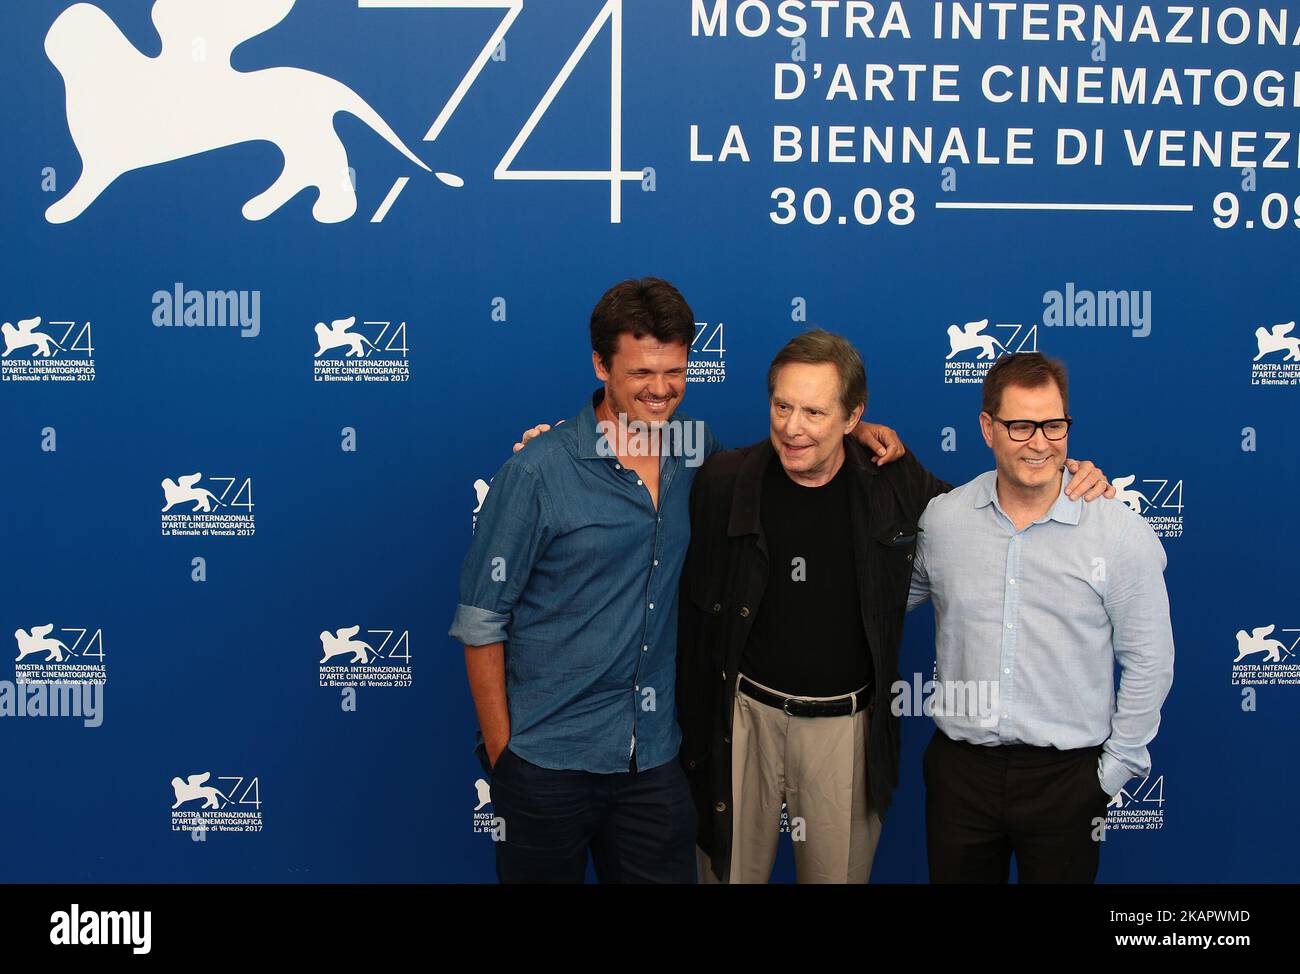 Director William Friedkin (C), producer Mickey Liddell (R) and producer Francesco Zippel attends a photocall of the movie 'The Devil and Father Amorth' presented out of competition during the 74th Venice Film Festival on August 31, 2017 in Venice, Italy. (Photo by Matteo Chinellato/NurPhoto) Stock Photo